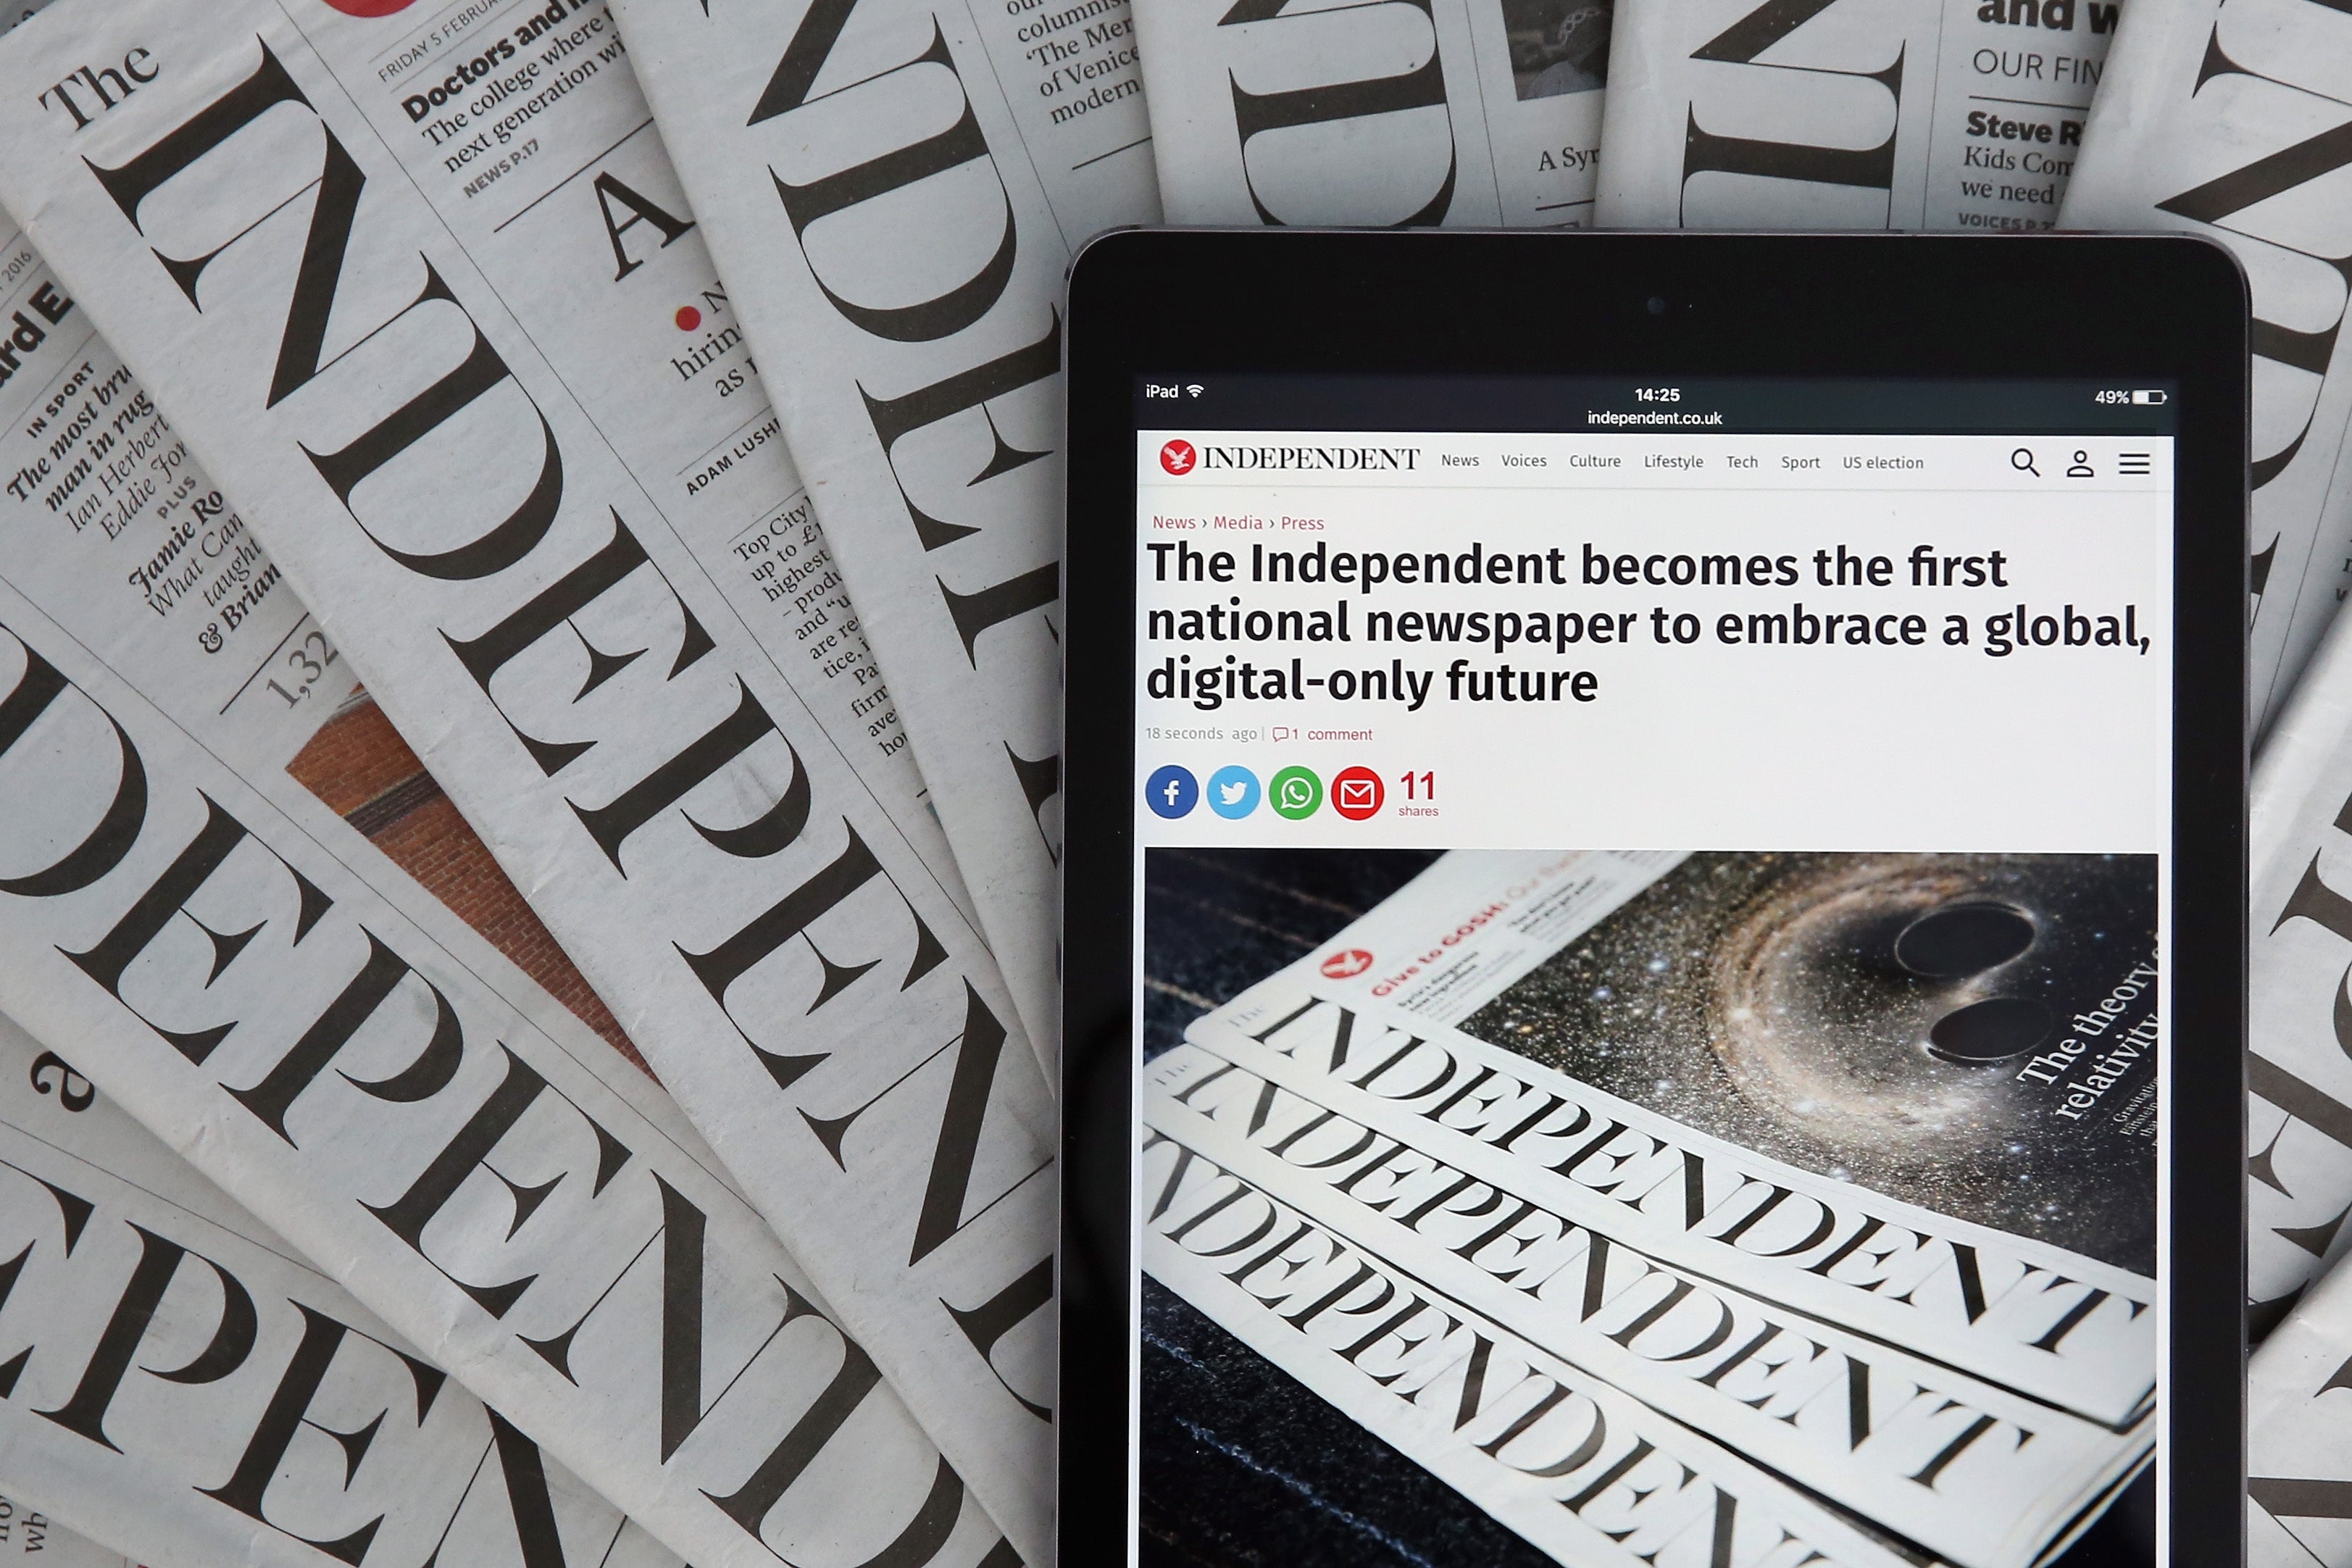 Independent Digital News and Media said on Thursday that it had reached an agreement with US-based BuzzFeed Inc which will create a “digital supergroup”